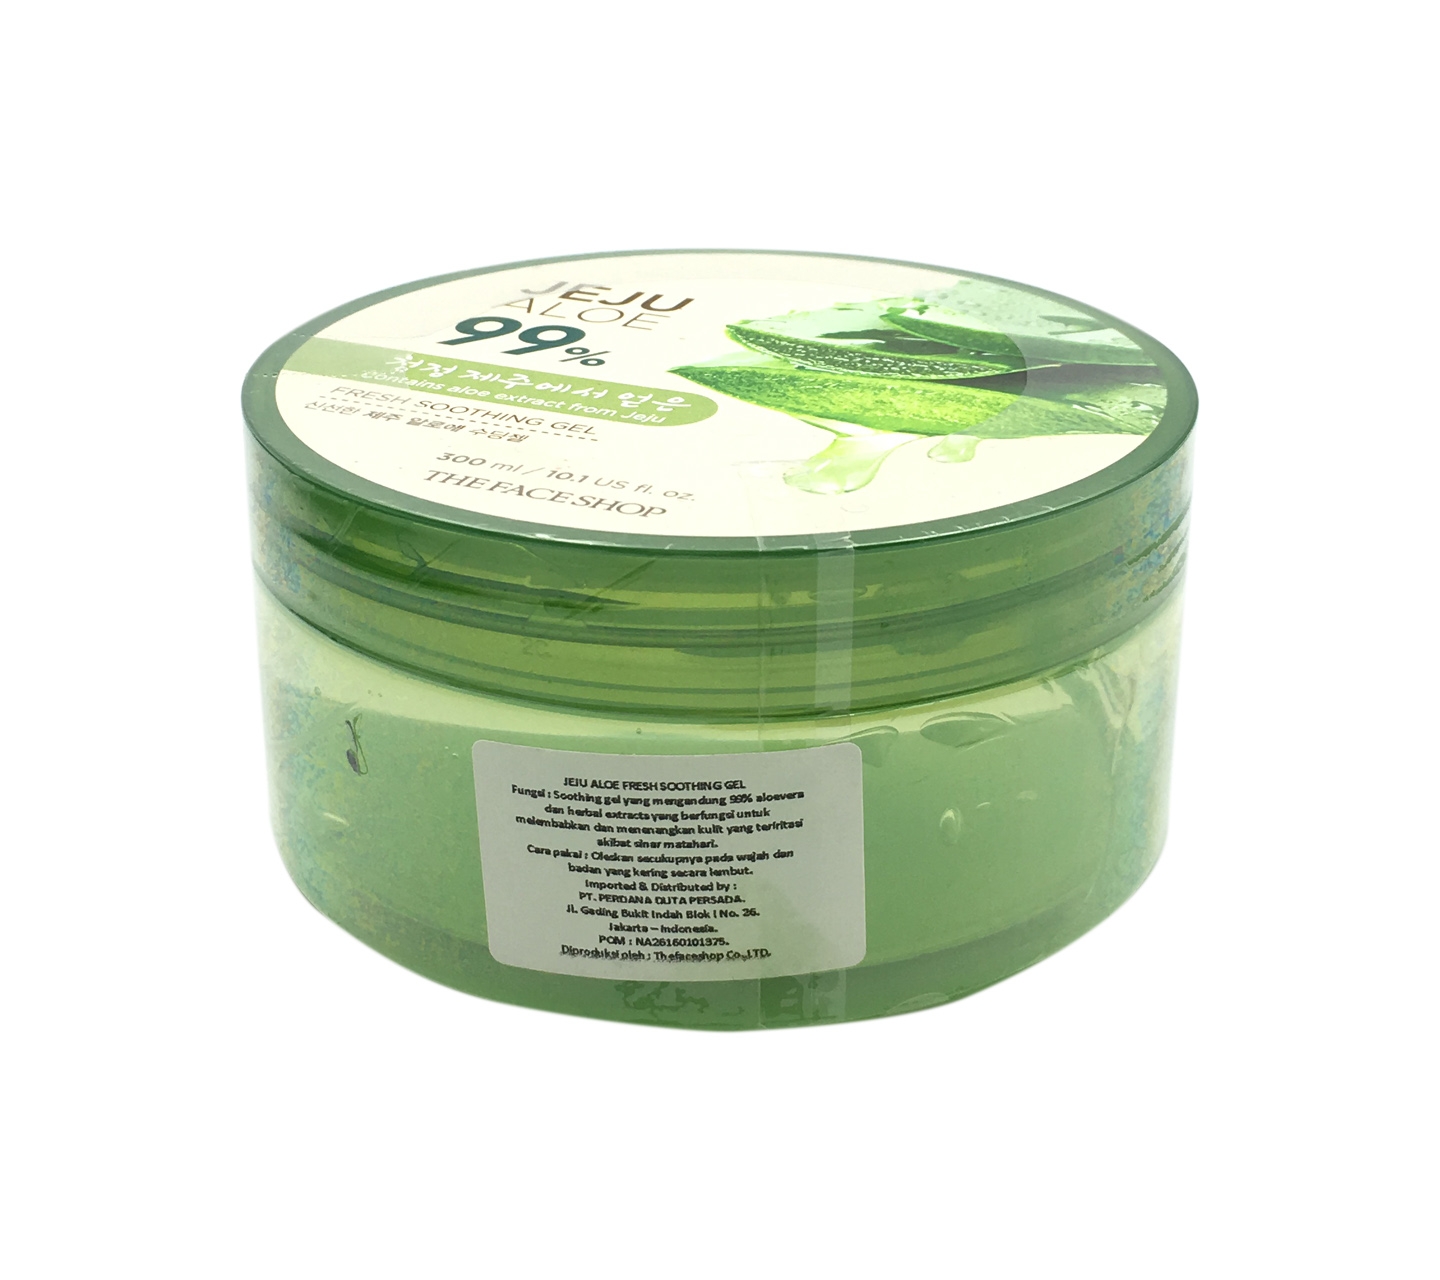 The face shop jeju aloe 99% fresh soothing gel